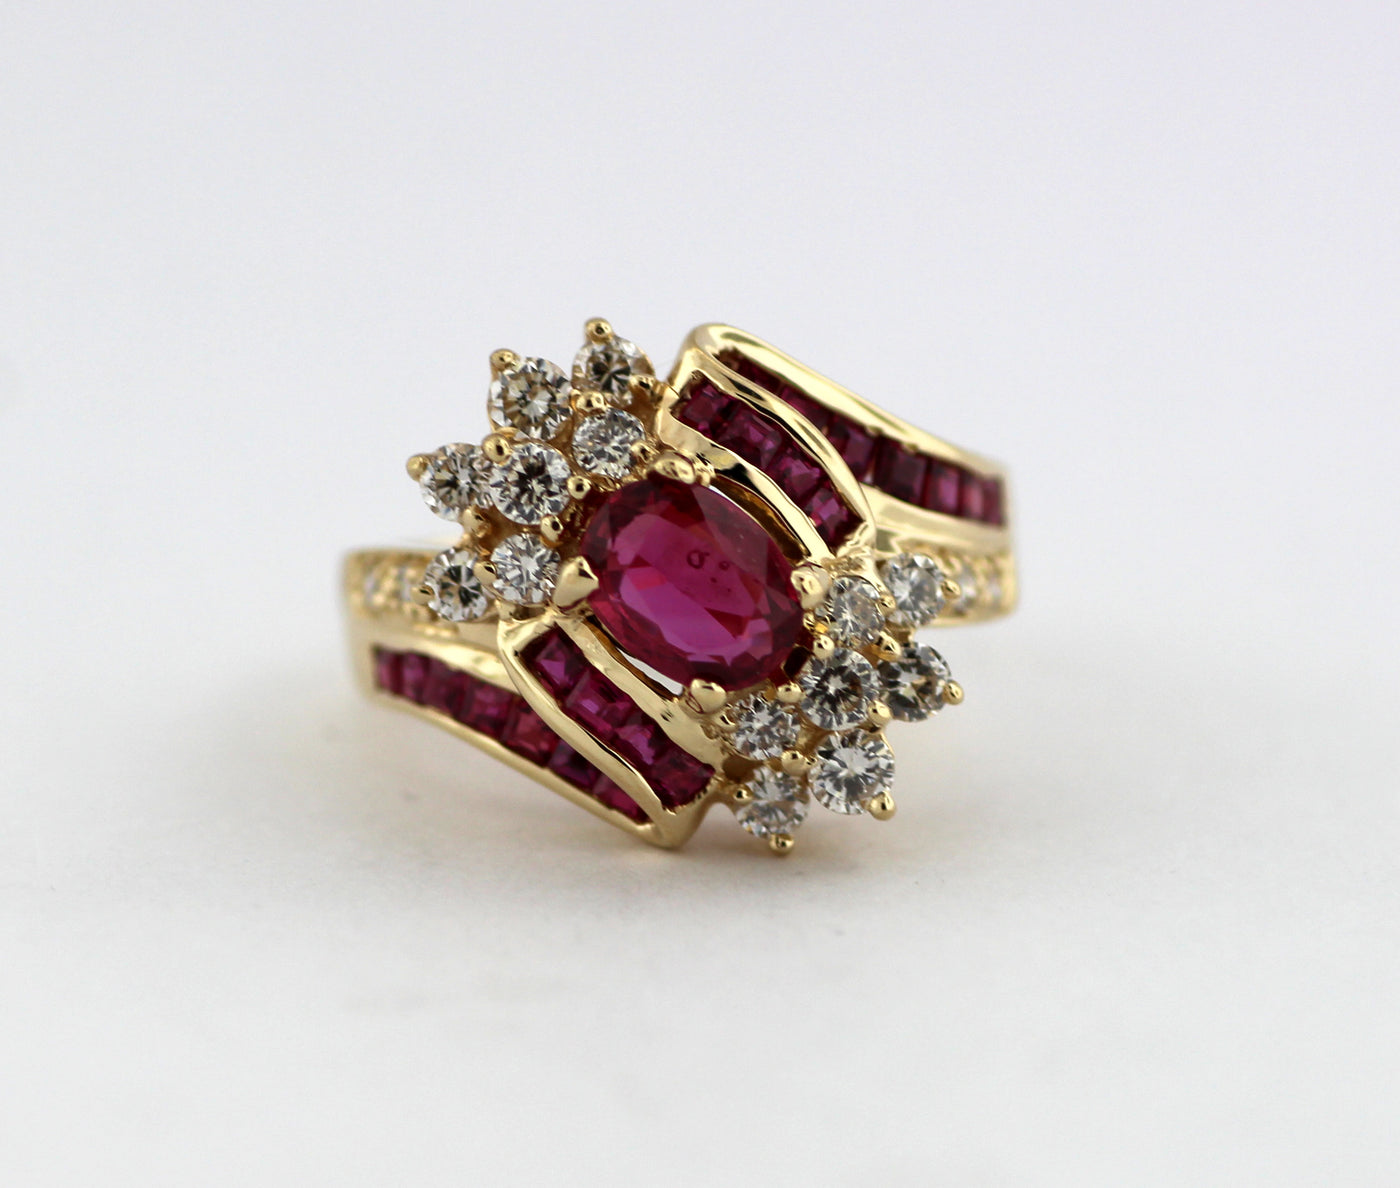 ESTATE 14K 1.50 CTTW RUBY AND DIAMOND RING .62 CTTW